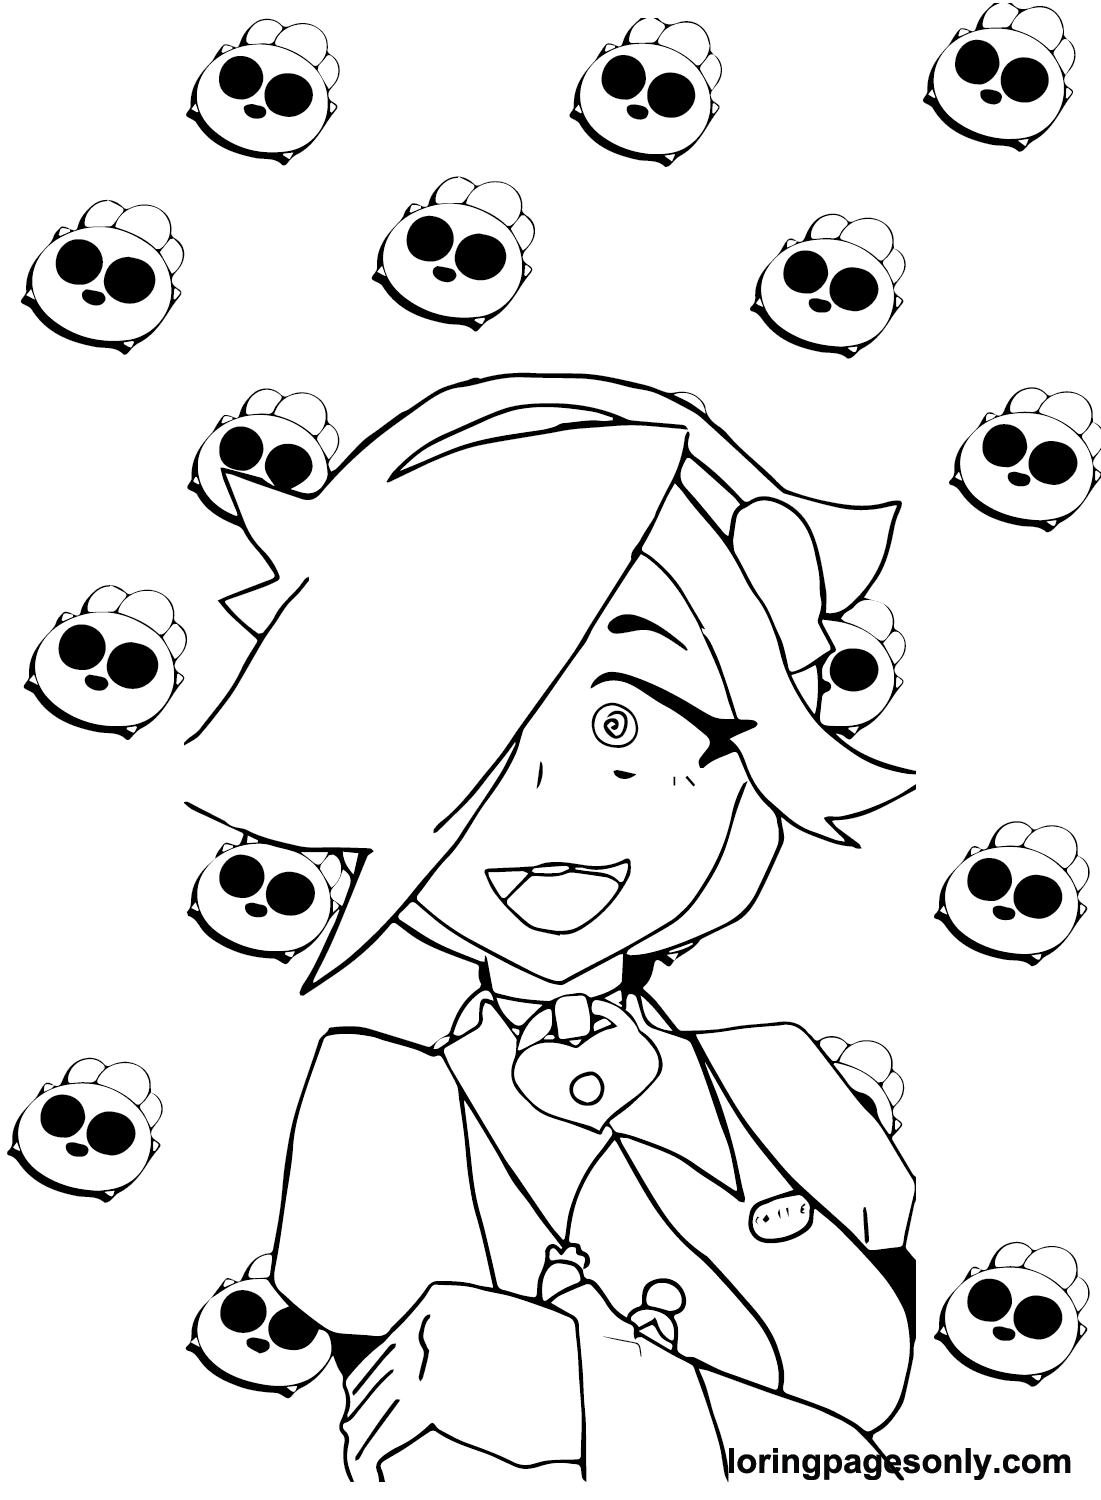 Printable Colette Brawl Stars Coloring Pages